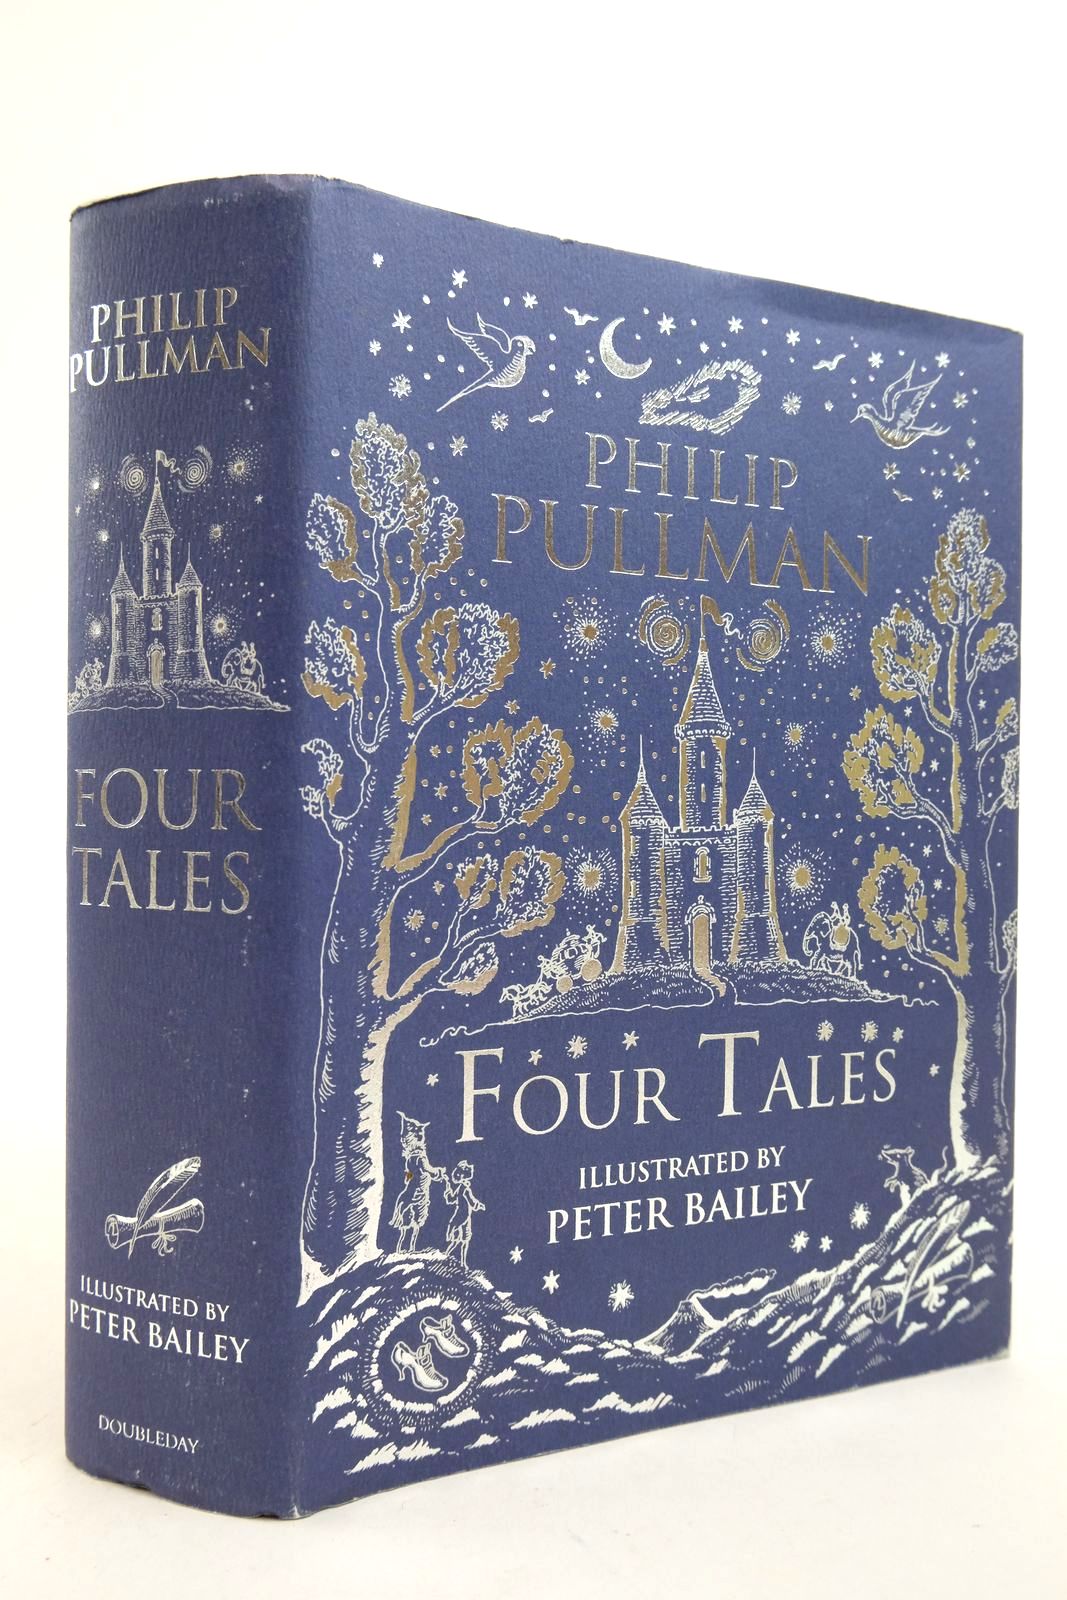 Photo of FOUR TALES written by Pullman, Philip illustrated by Bailey, Peter published by Doubleday (STOCK CODE: 2140727)  for sale by Stella & Rose's Books